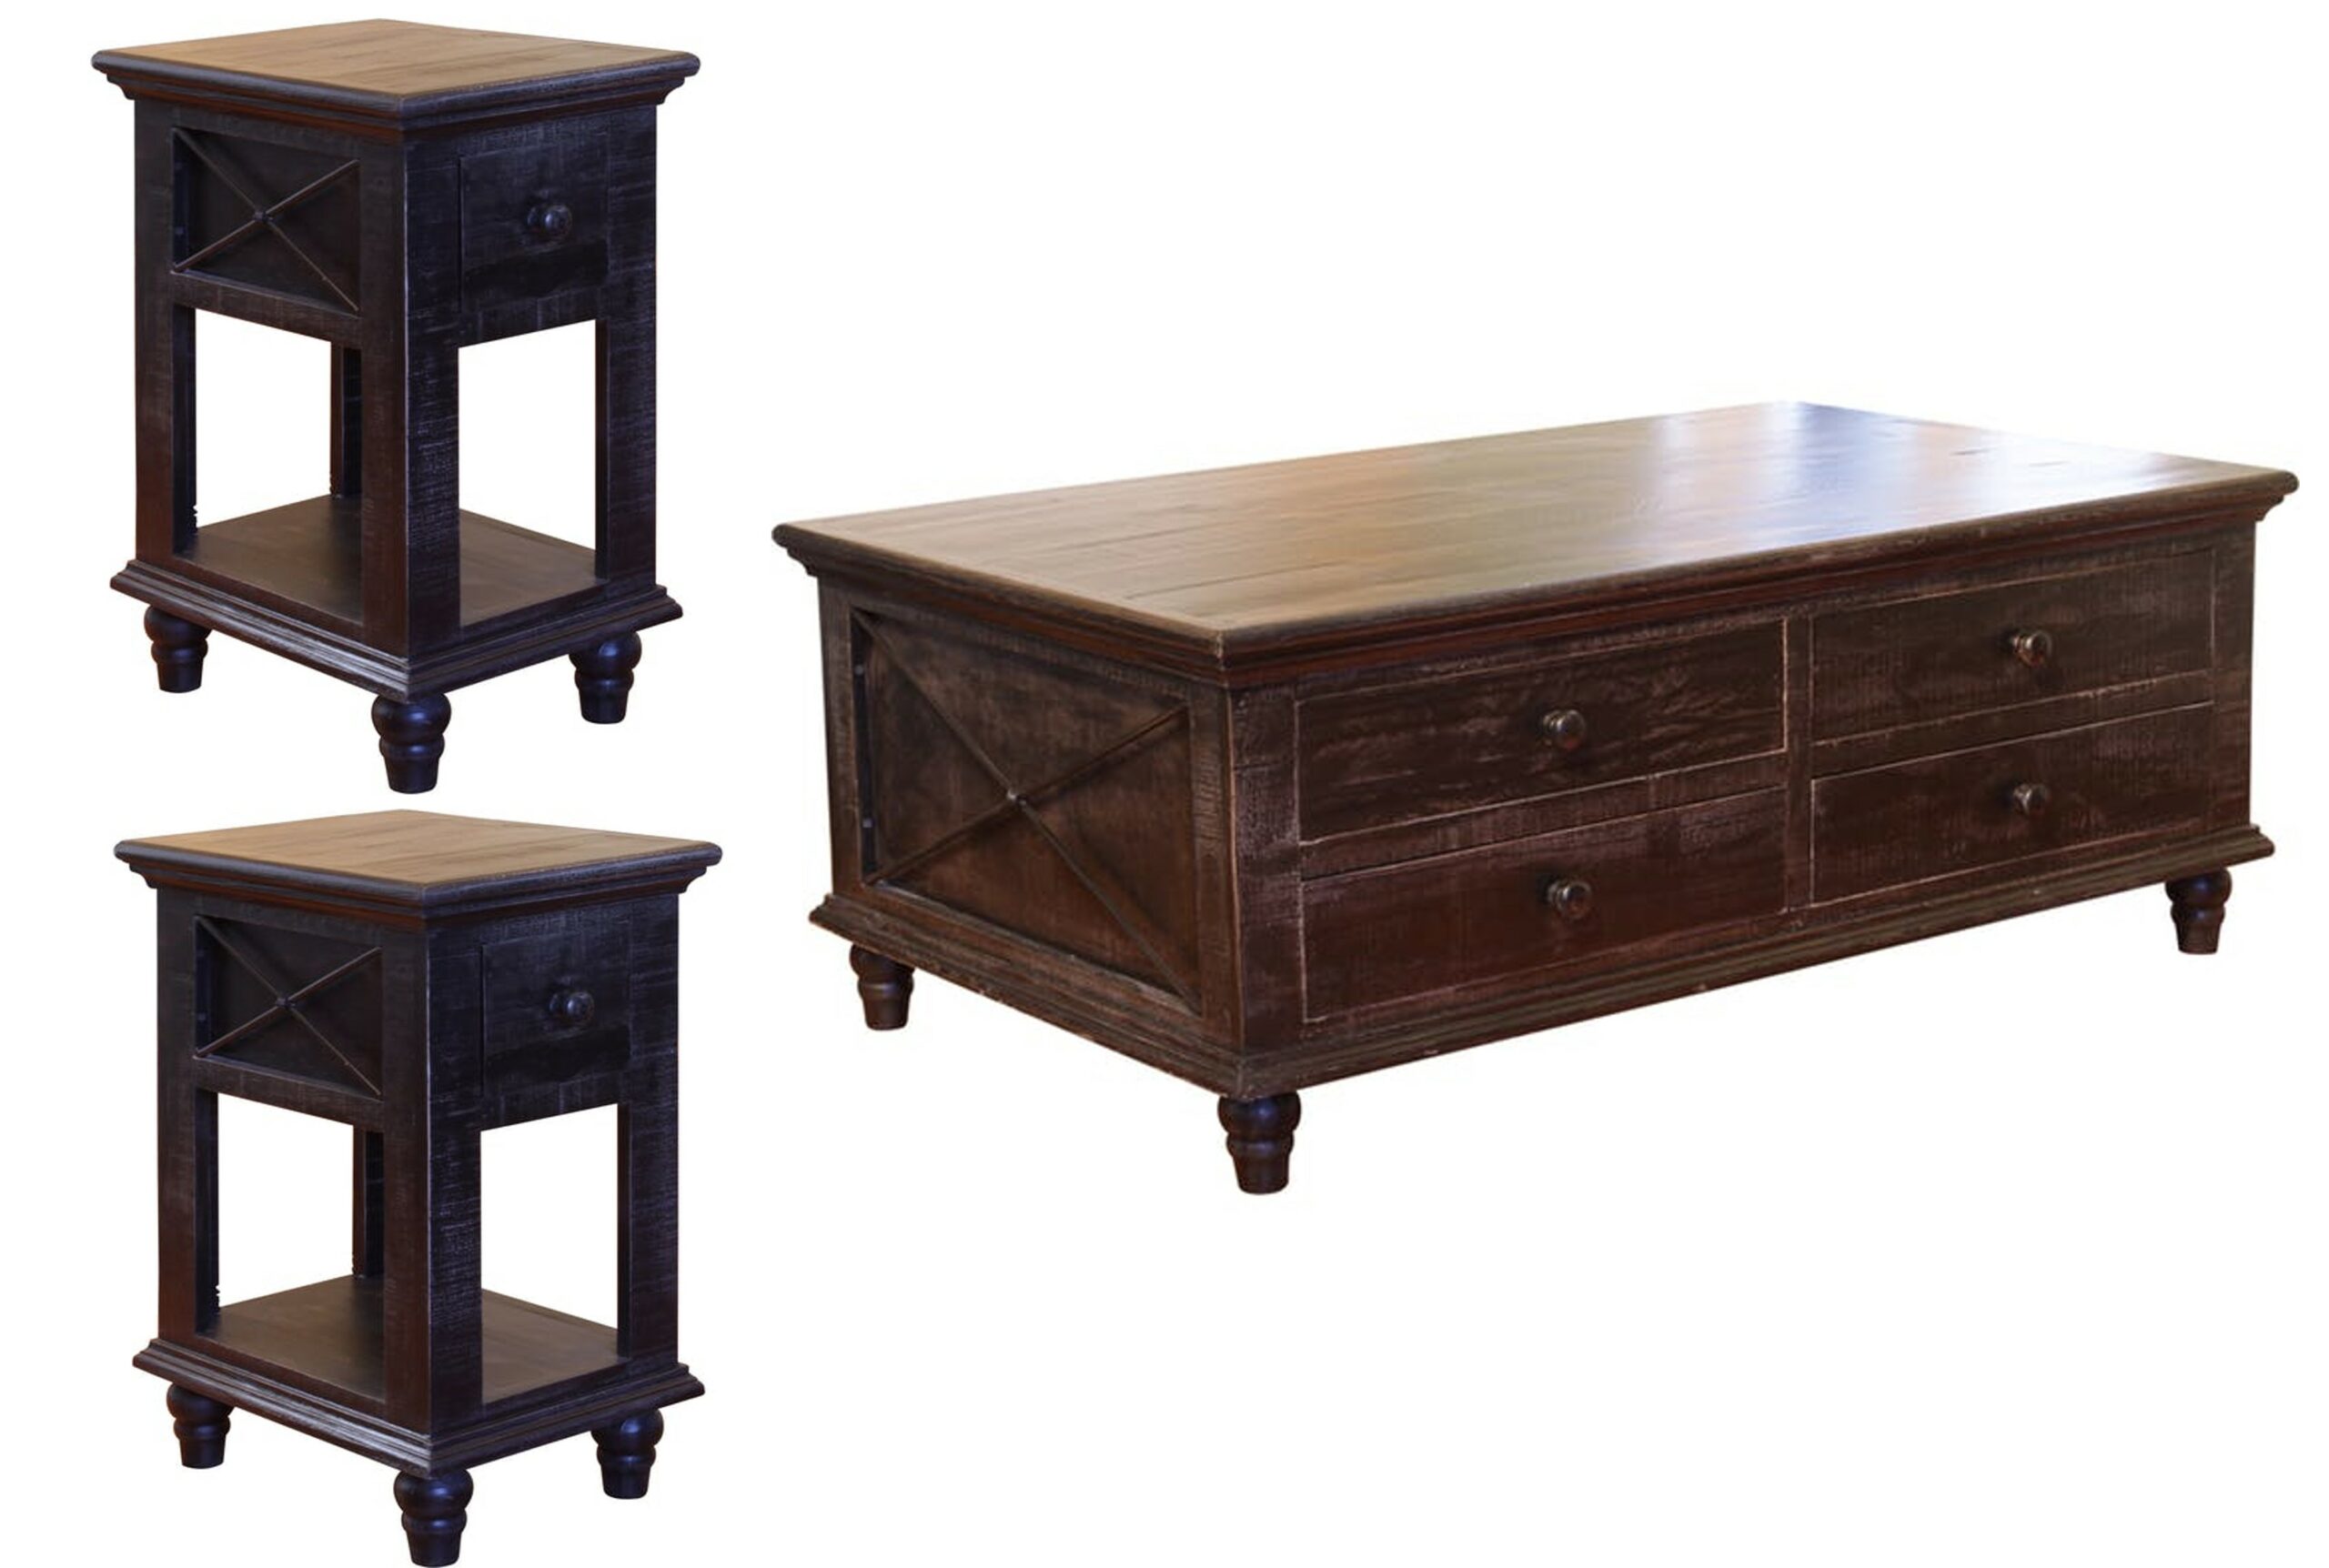 IFD973 Coffee table and 2 end tables